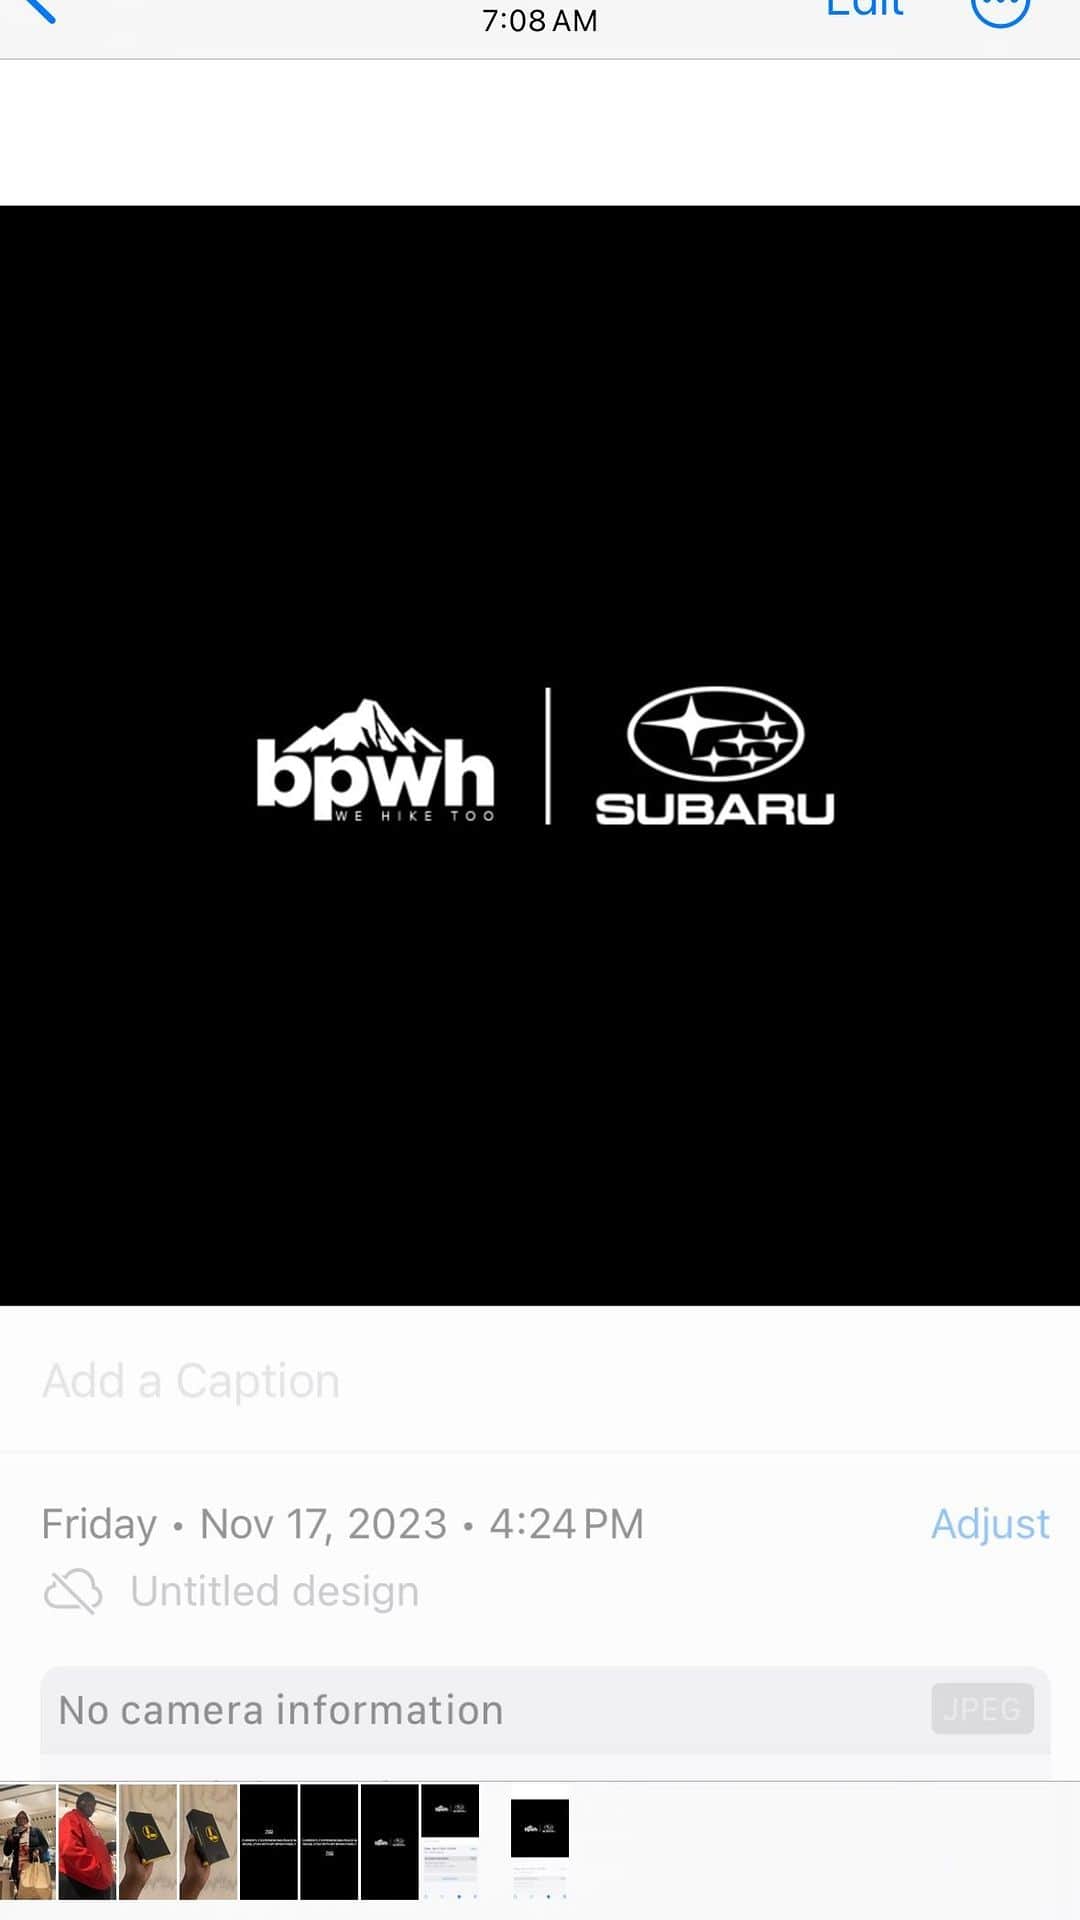 Subaru of Americaのインスタグラム：「We are excited to Announce our Official Partnership with our friends at Subaru. Together we are on a mission to introducing the world to National Parks across the country and promote outdoor enjoyment and advocacy. Thank You for supporting our mission #BlackInMoab 🤝🏾  Official Partner: @subaru_usa DP: @phil.makini_studio  Photographer: @creativeconnect  Photographer: @lensoflyons  Creative Director: @tmooremedia Location: @field.stn」